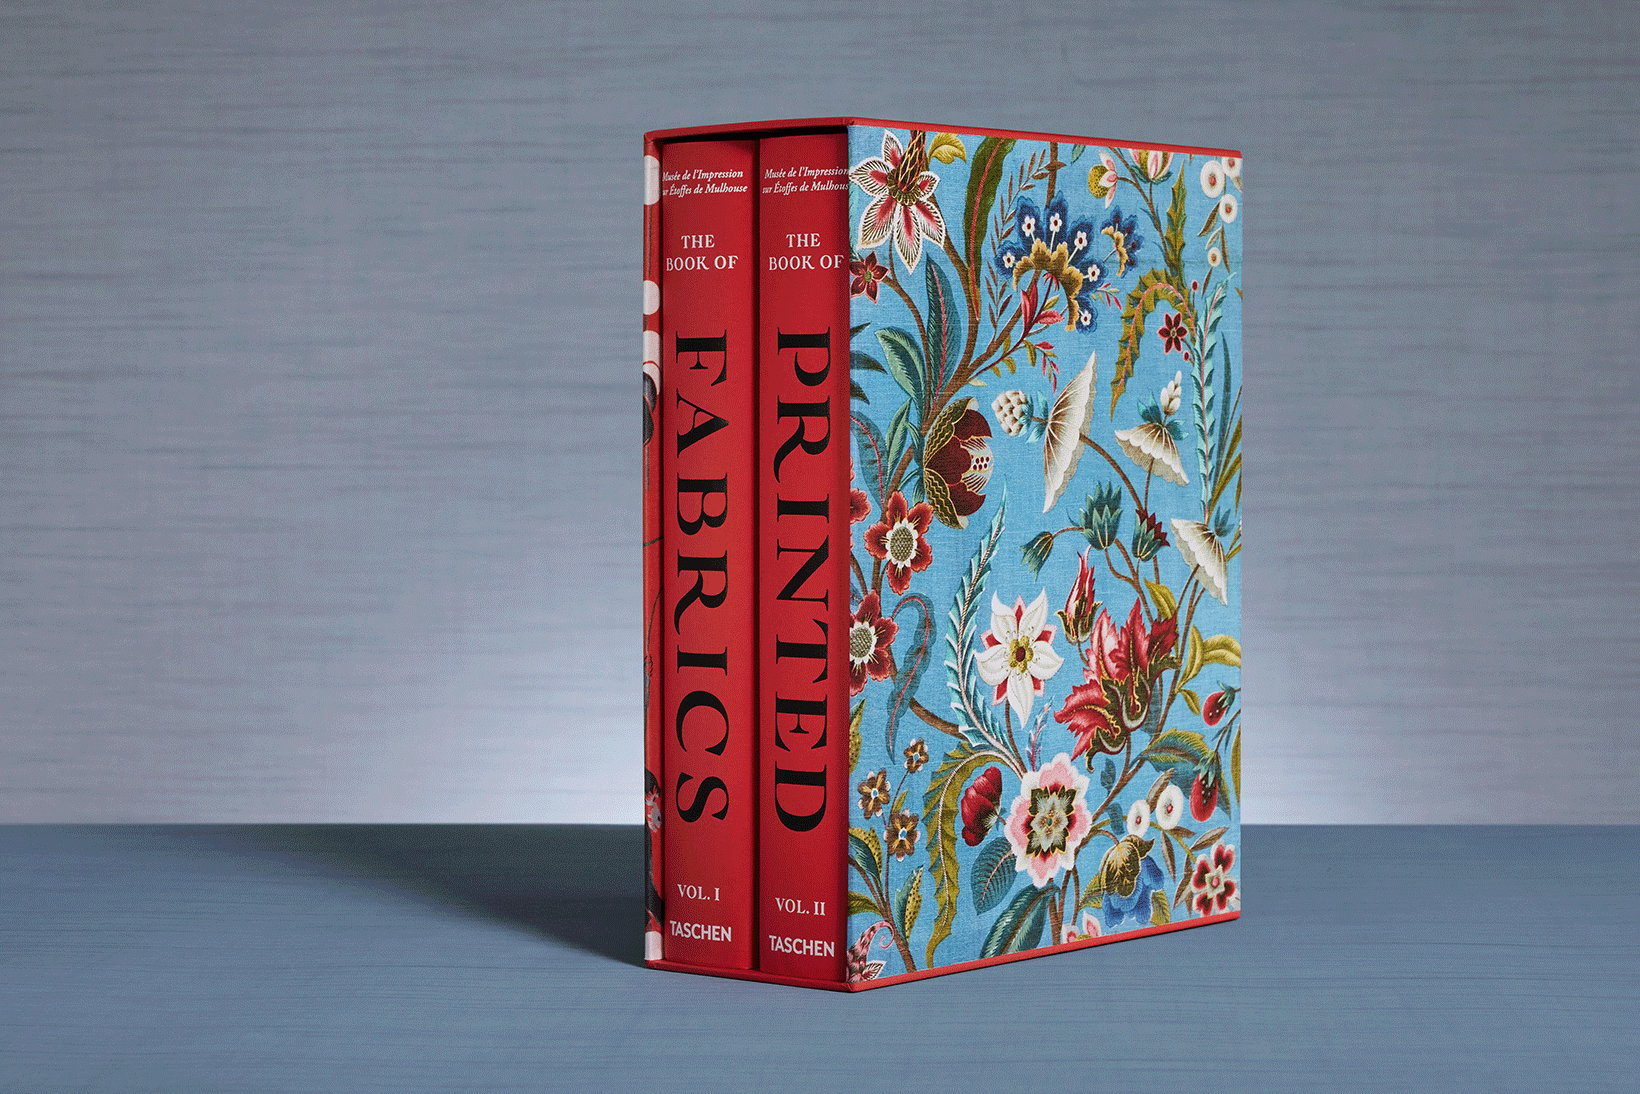 The History of Printed Fabrics in Two Splendid Volumes